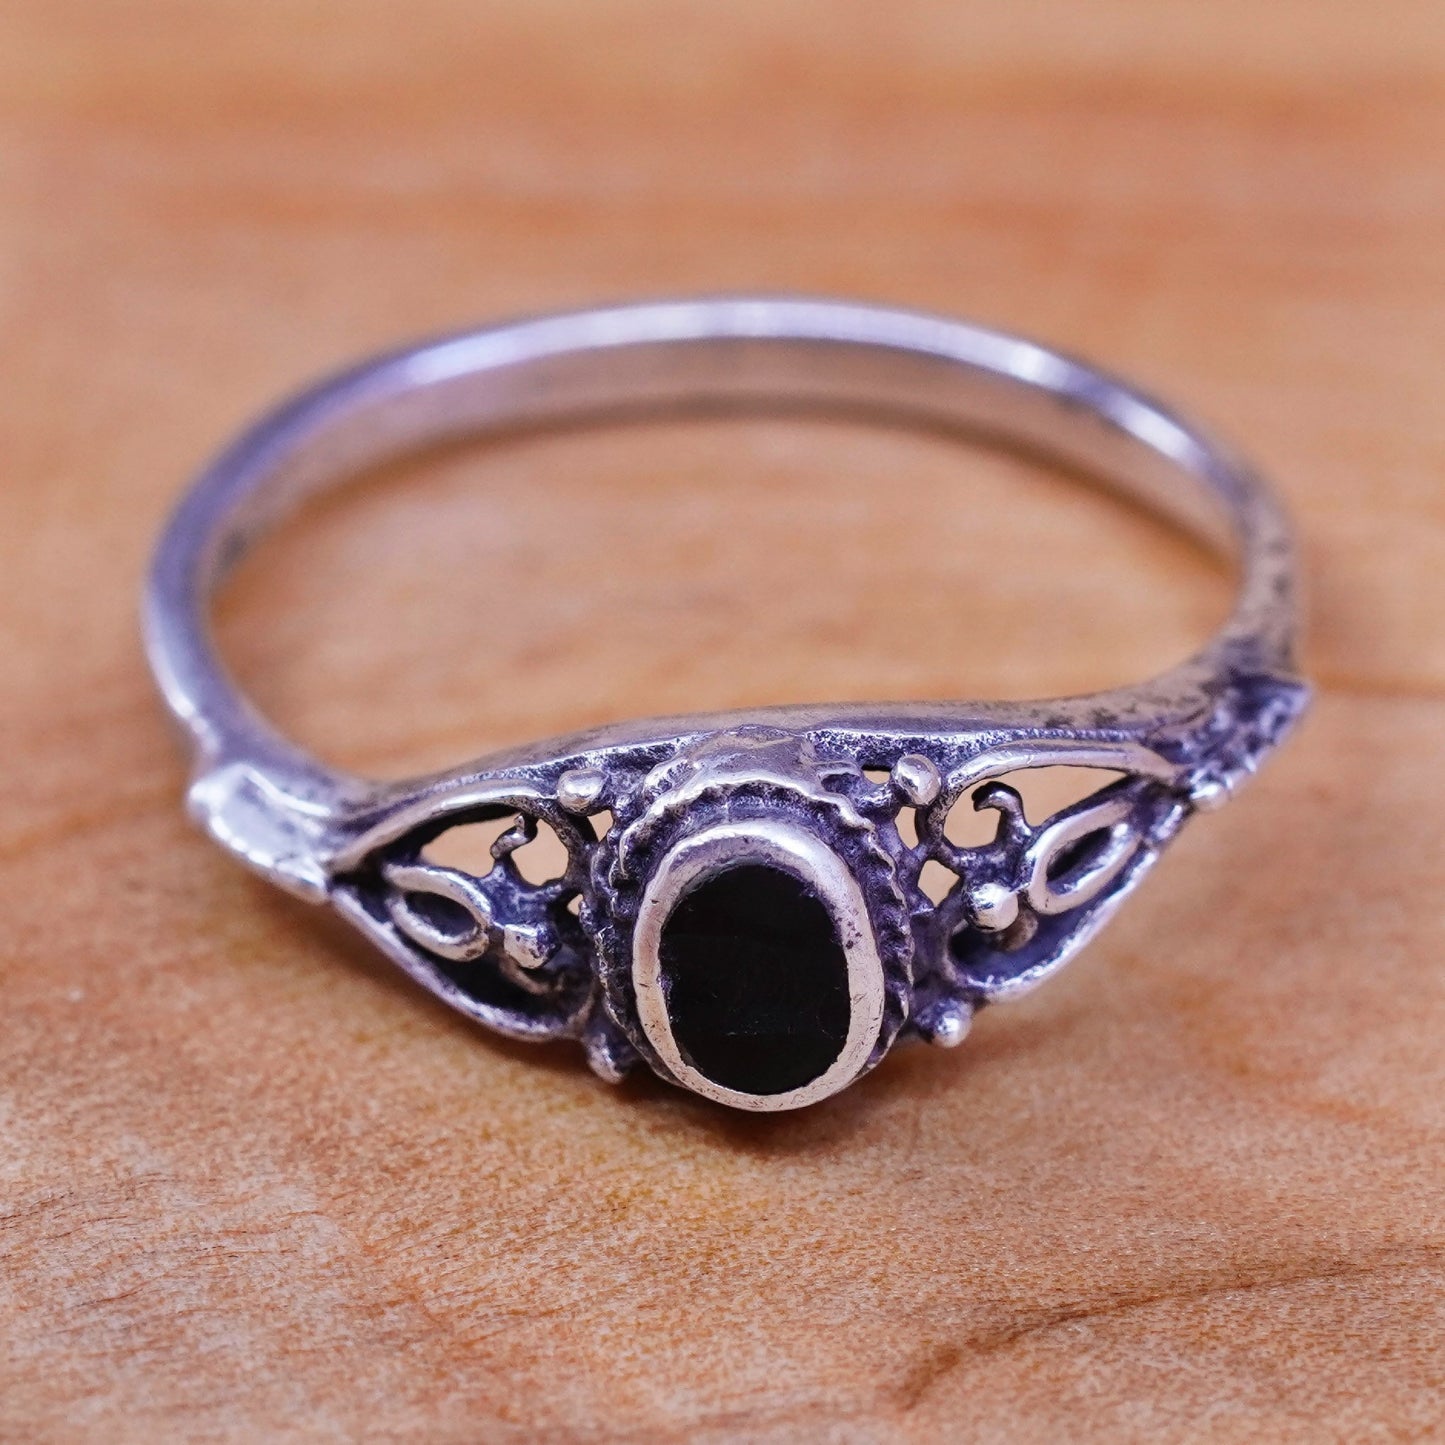 sz 6.75, vintage filigree Sterling 925 silver handmade ring with oval obsidian